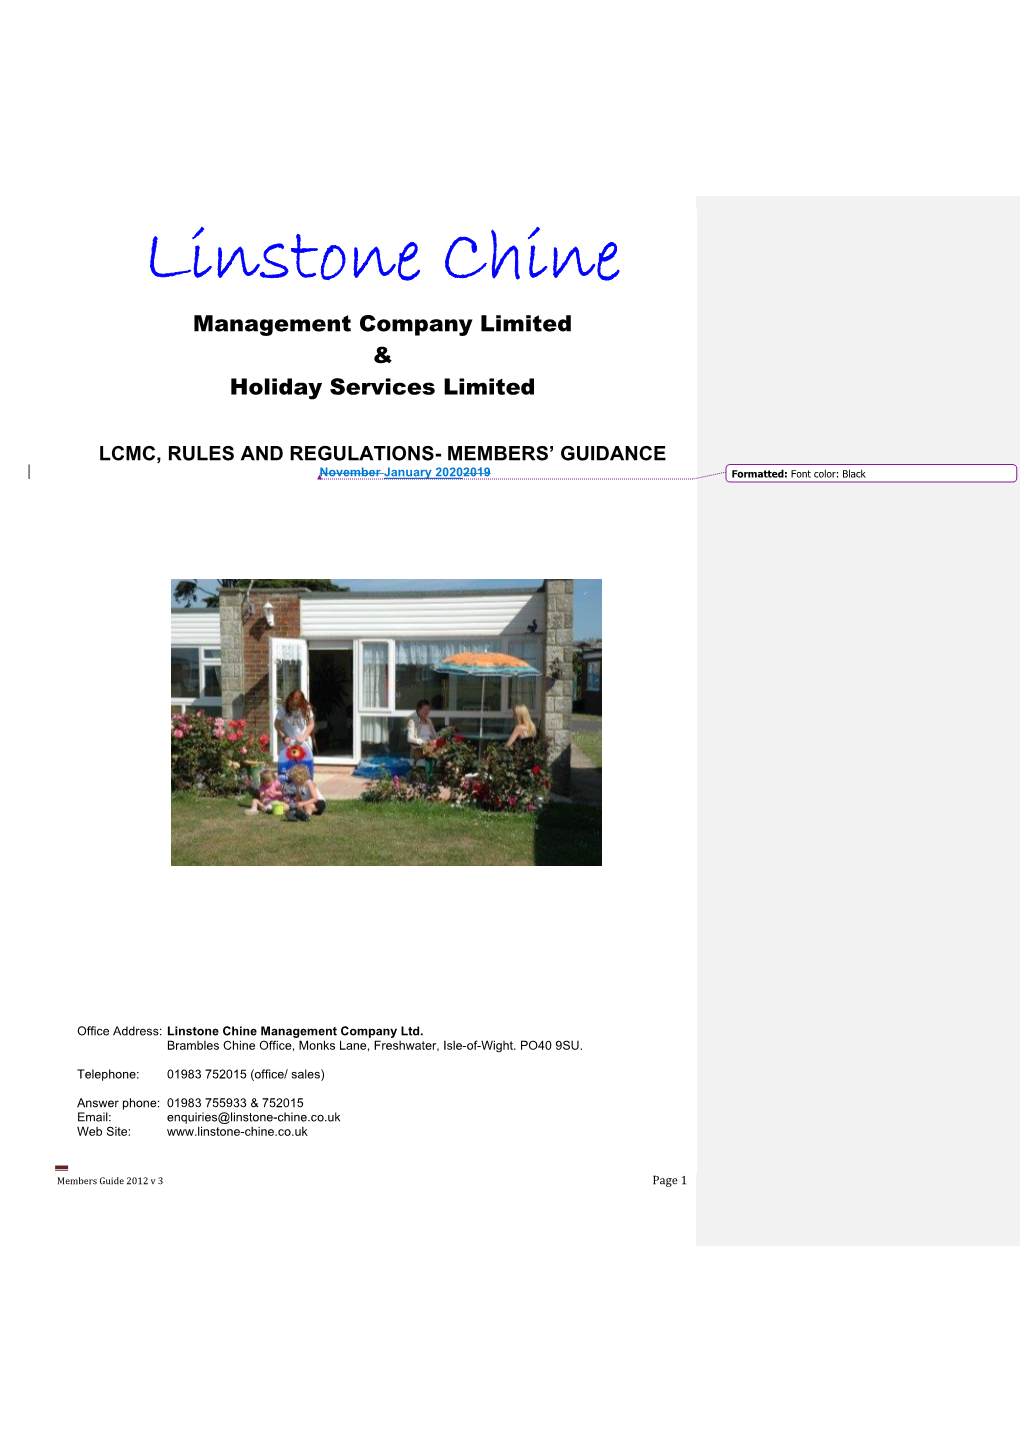 Linstone Chine Management Company Limited & Holiday Services Limited